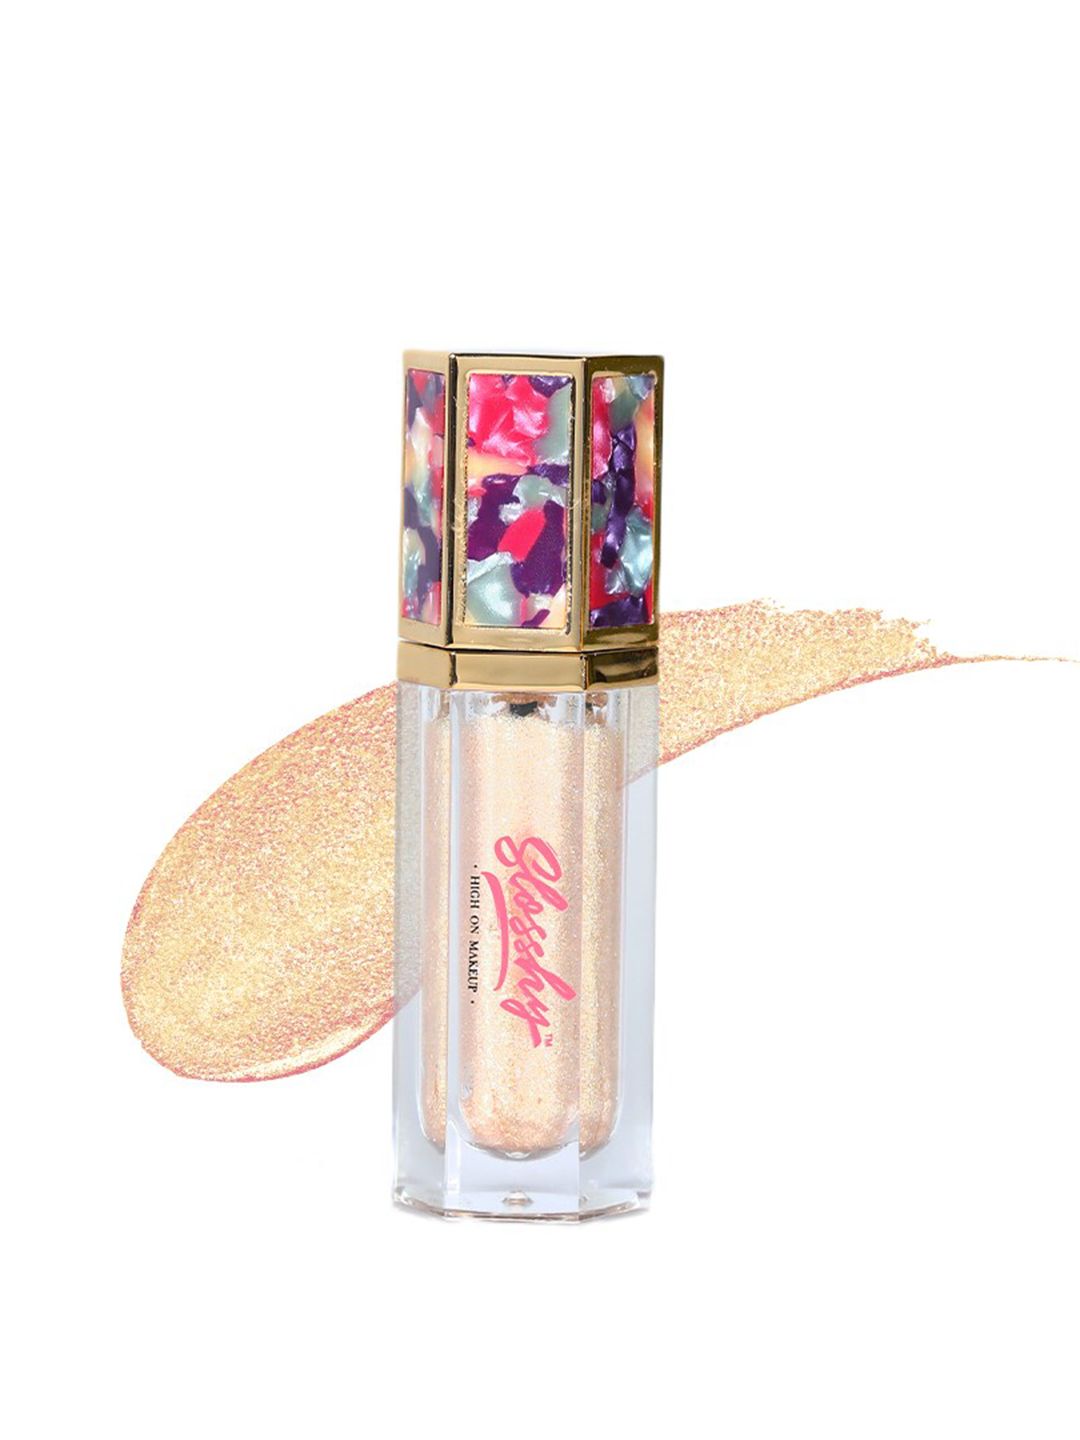 Slosshy Liquid Eyeshadow - Come Closer Price in India